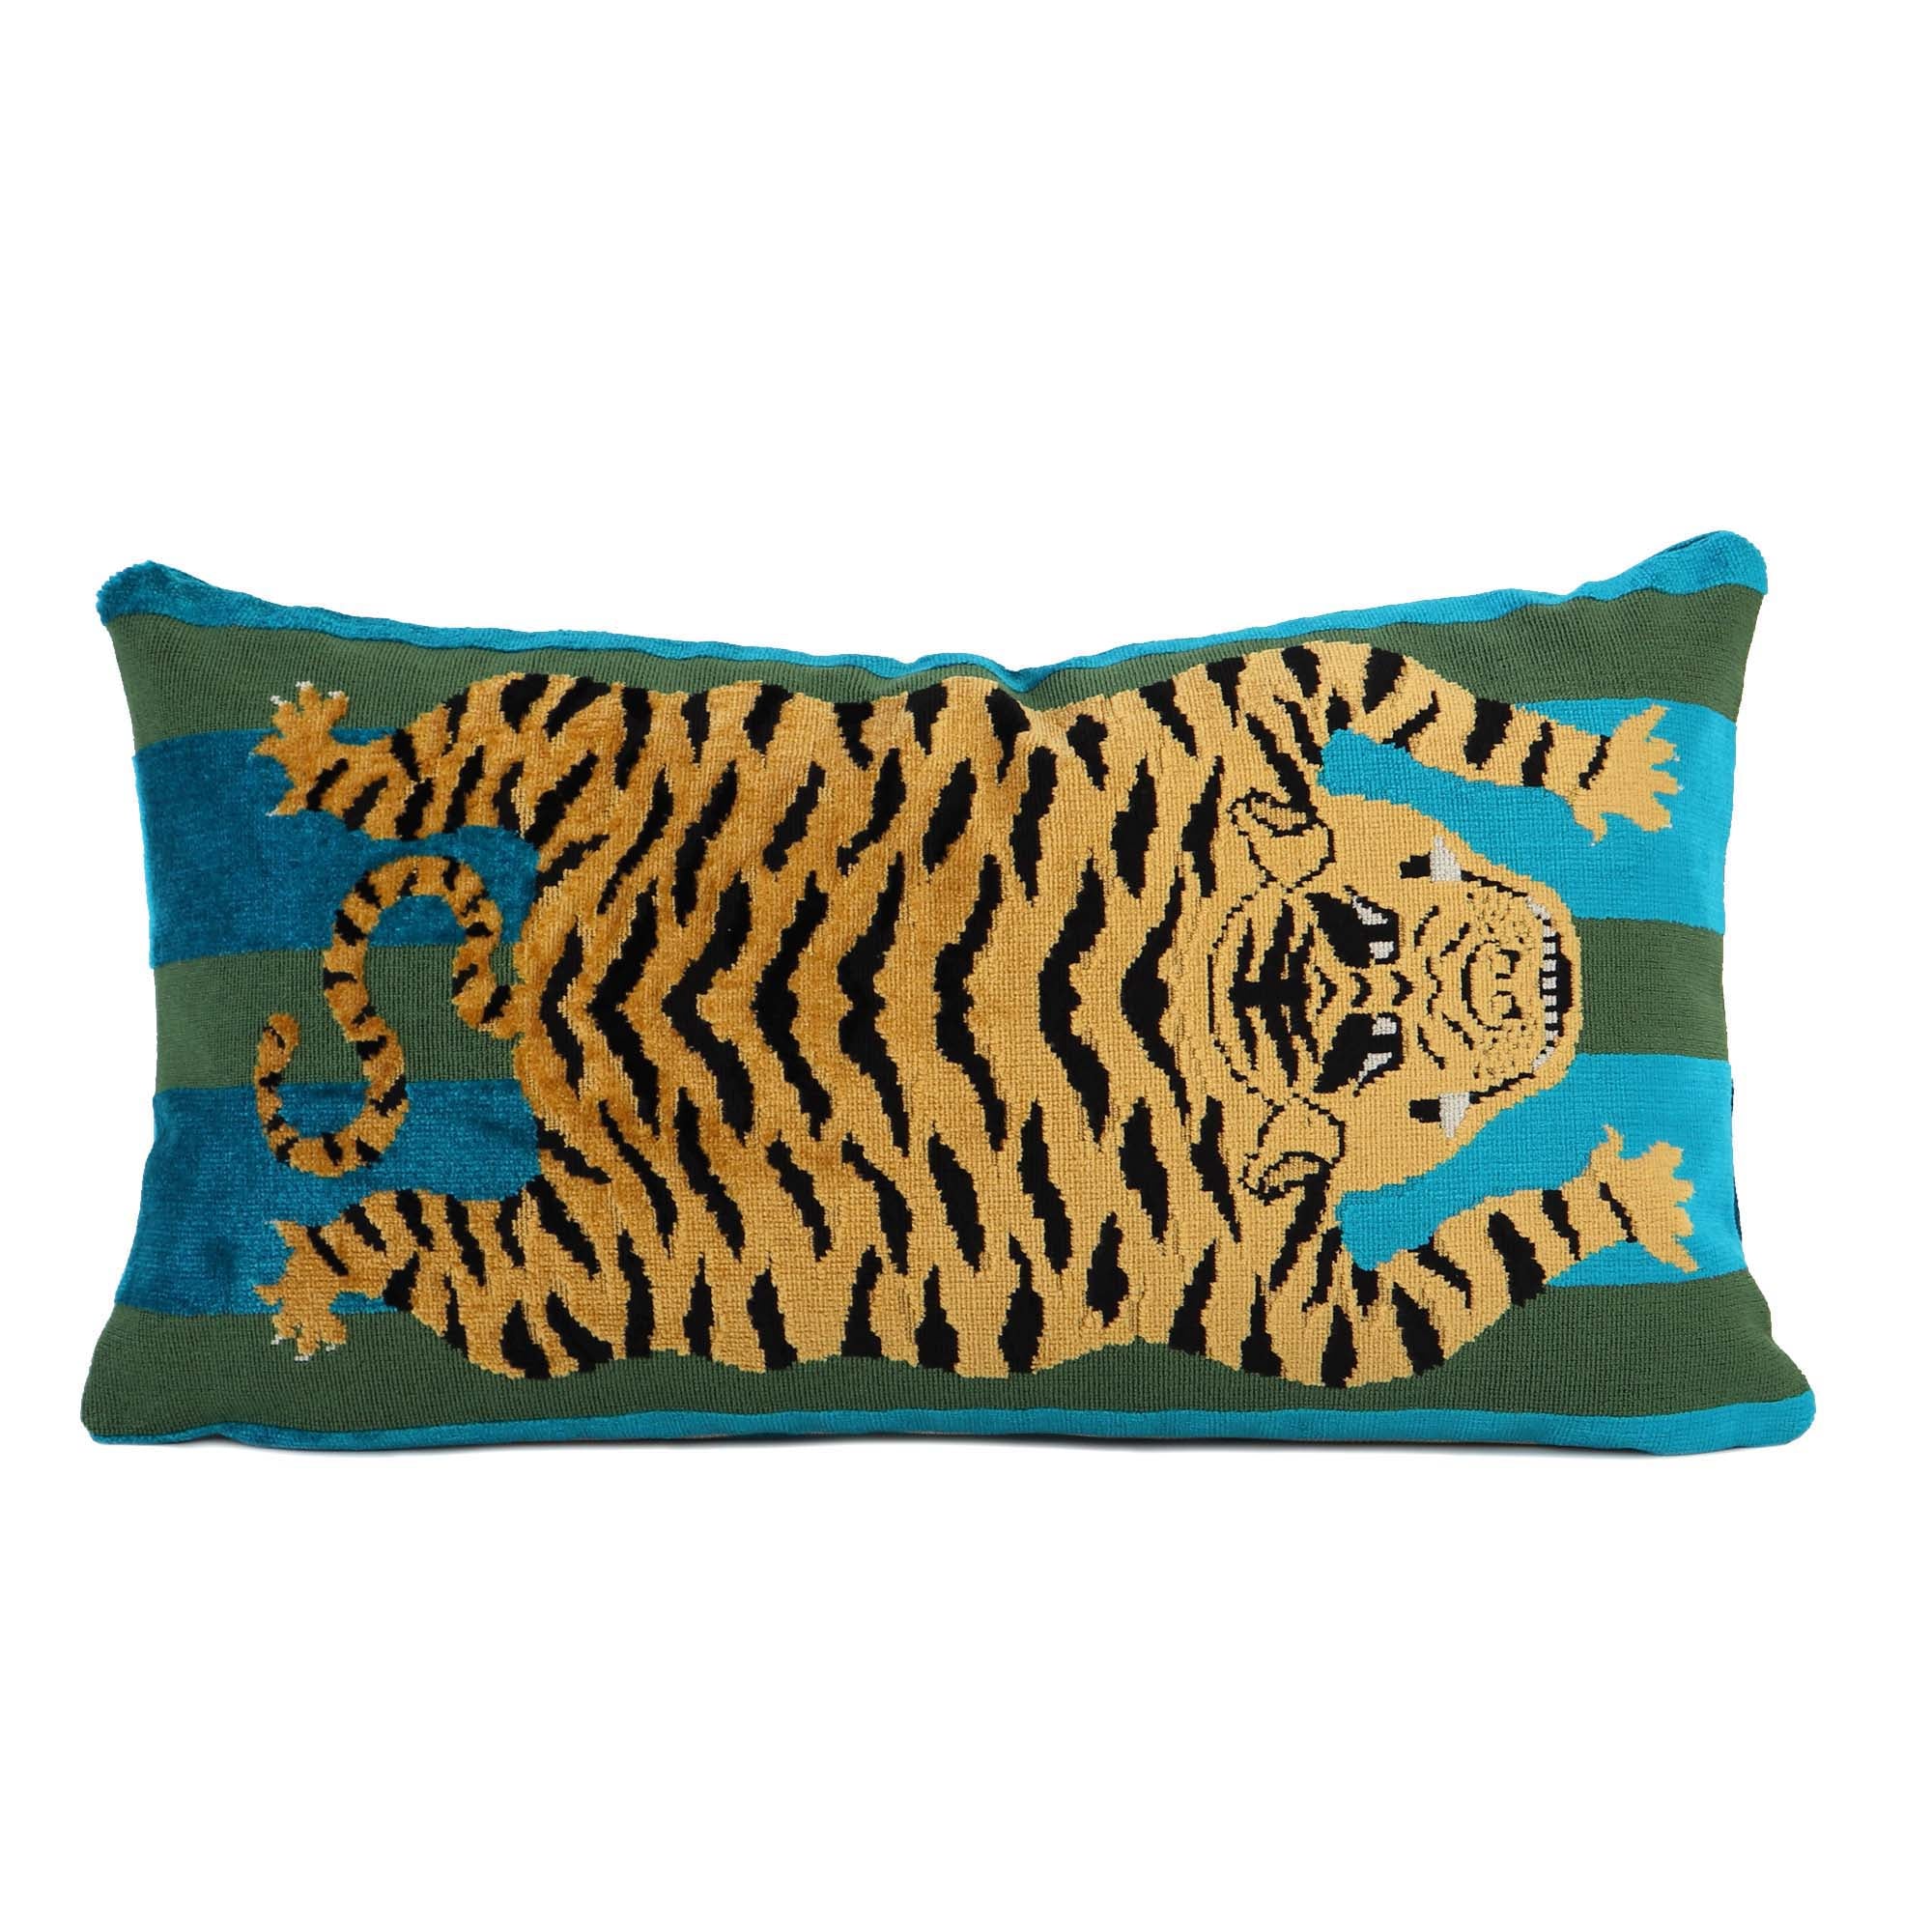 Tigers on the Loose! | Jokhang Velvet Tiger Collection